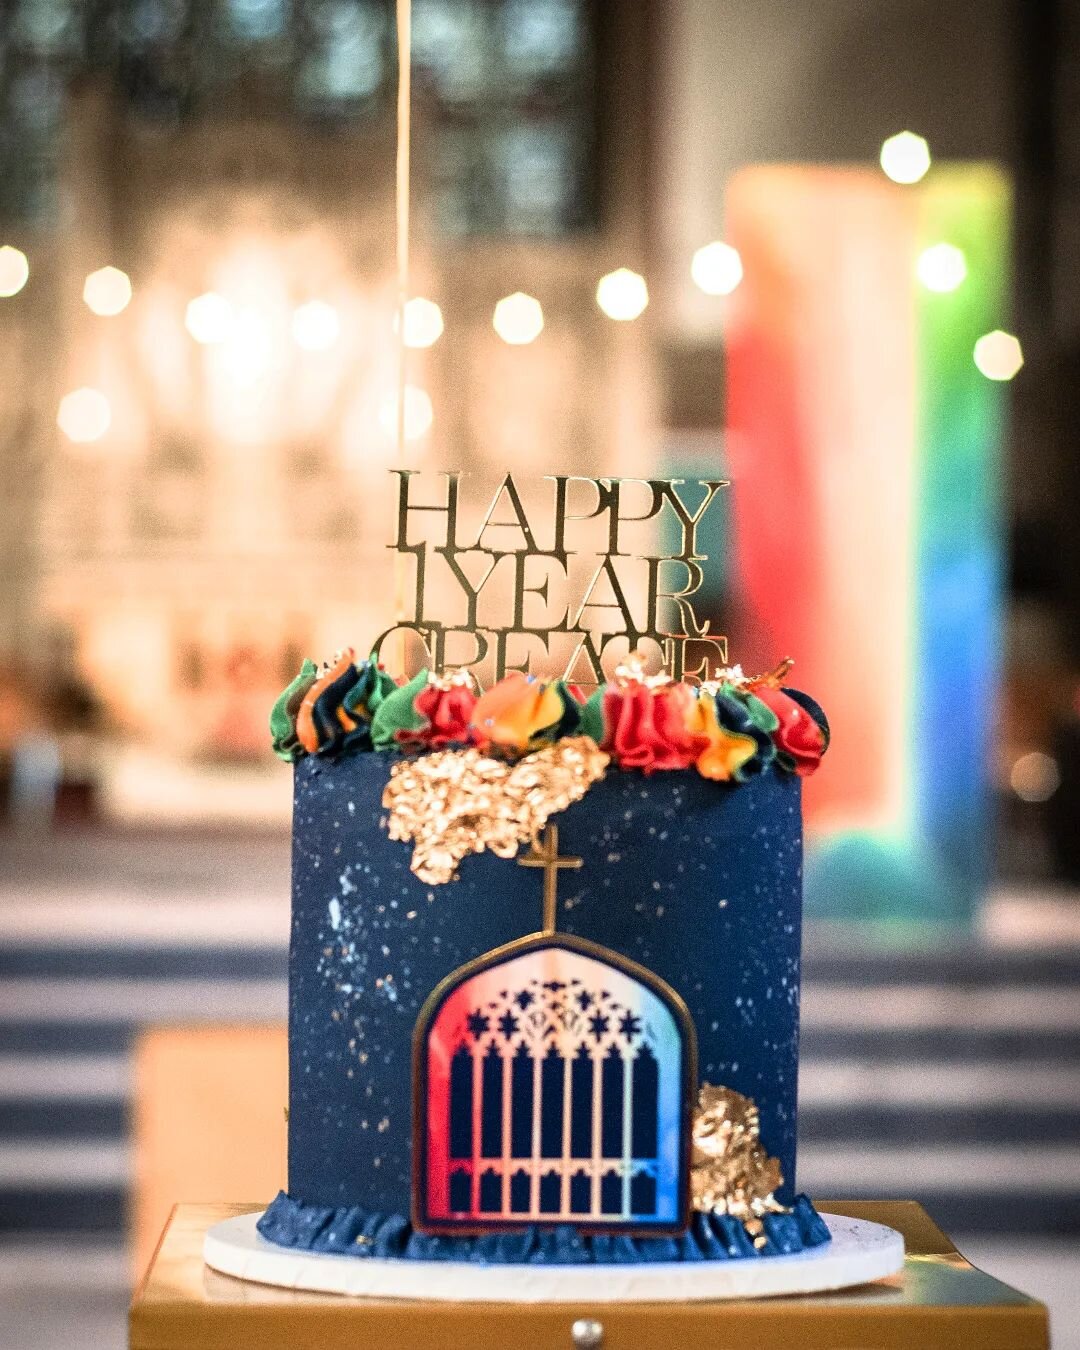 HAPPY 1 YEAR CREATE
It's been a couple of weeks now, but we can't stop thinking about the fun we had at our 1 year celebration - music, dancing, building cardboard churches, and of course this gorgeous cake made by the talented Rewa @shortandsweetlon